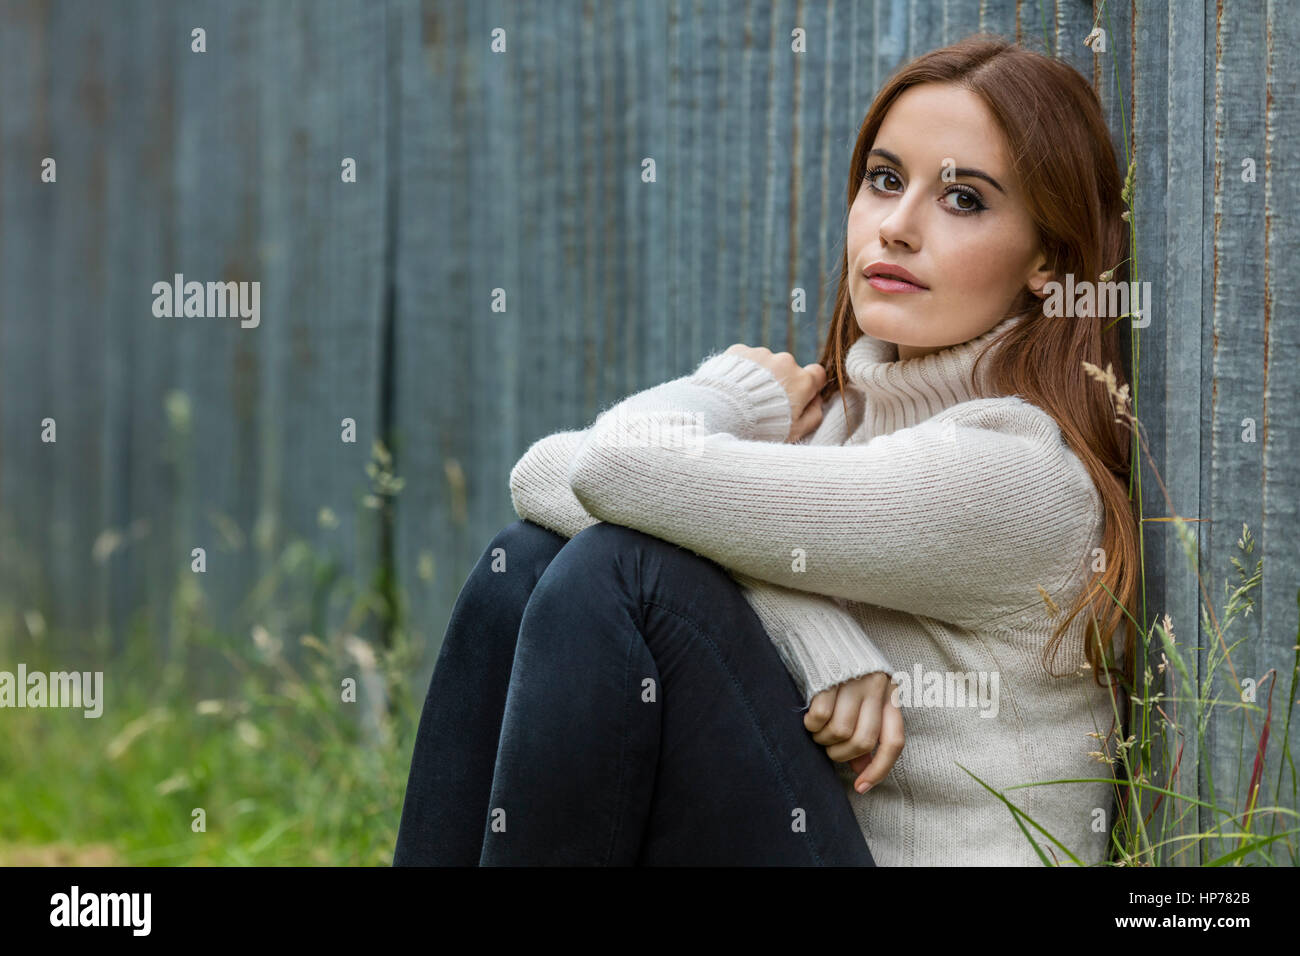 Outdoor portrait of beautiful thoughtful girl or young woman with red hair wearing a white jumper Stock Photo